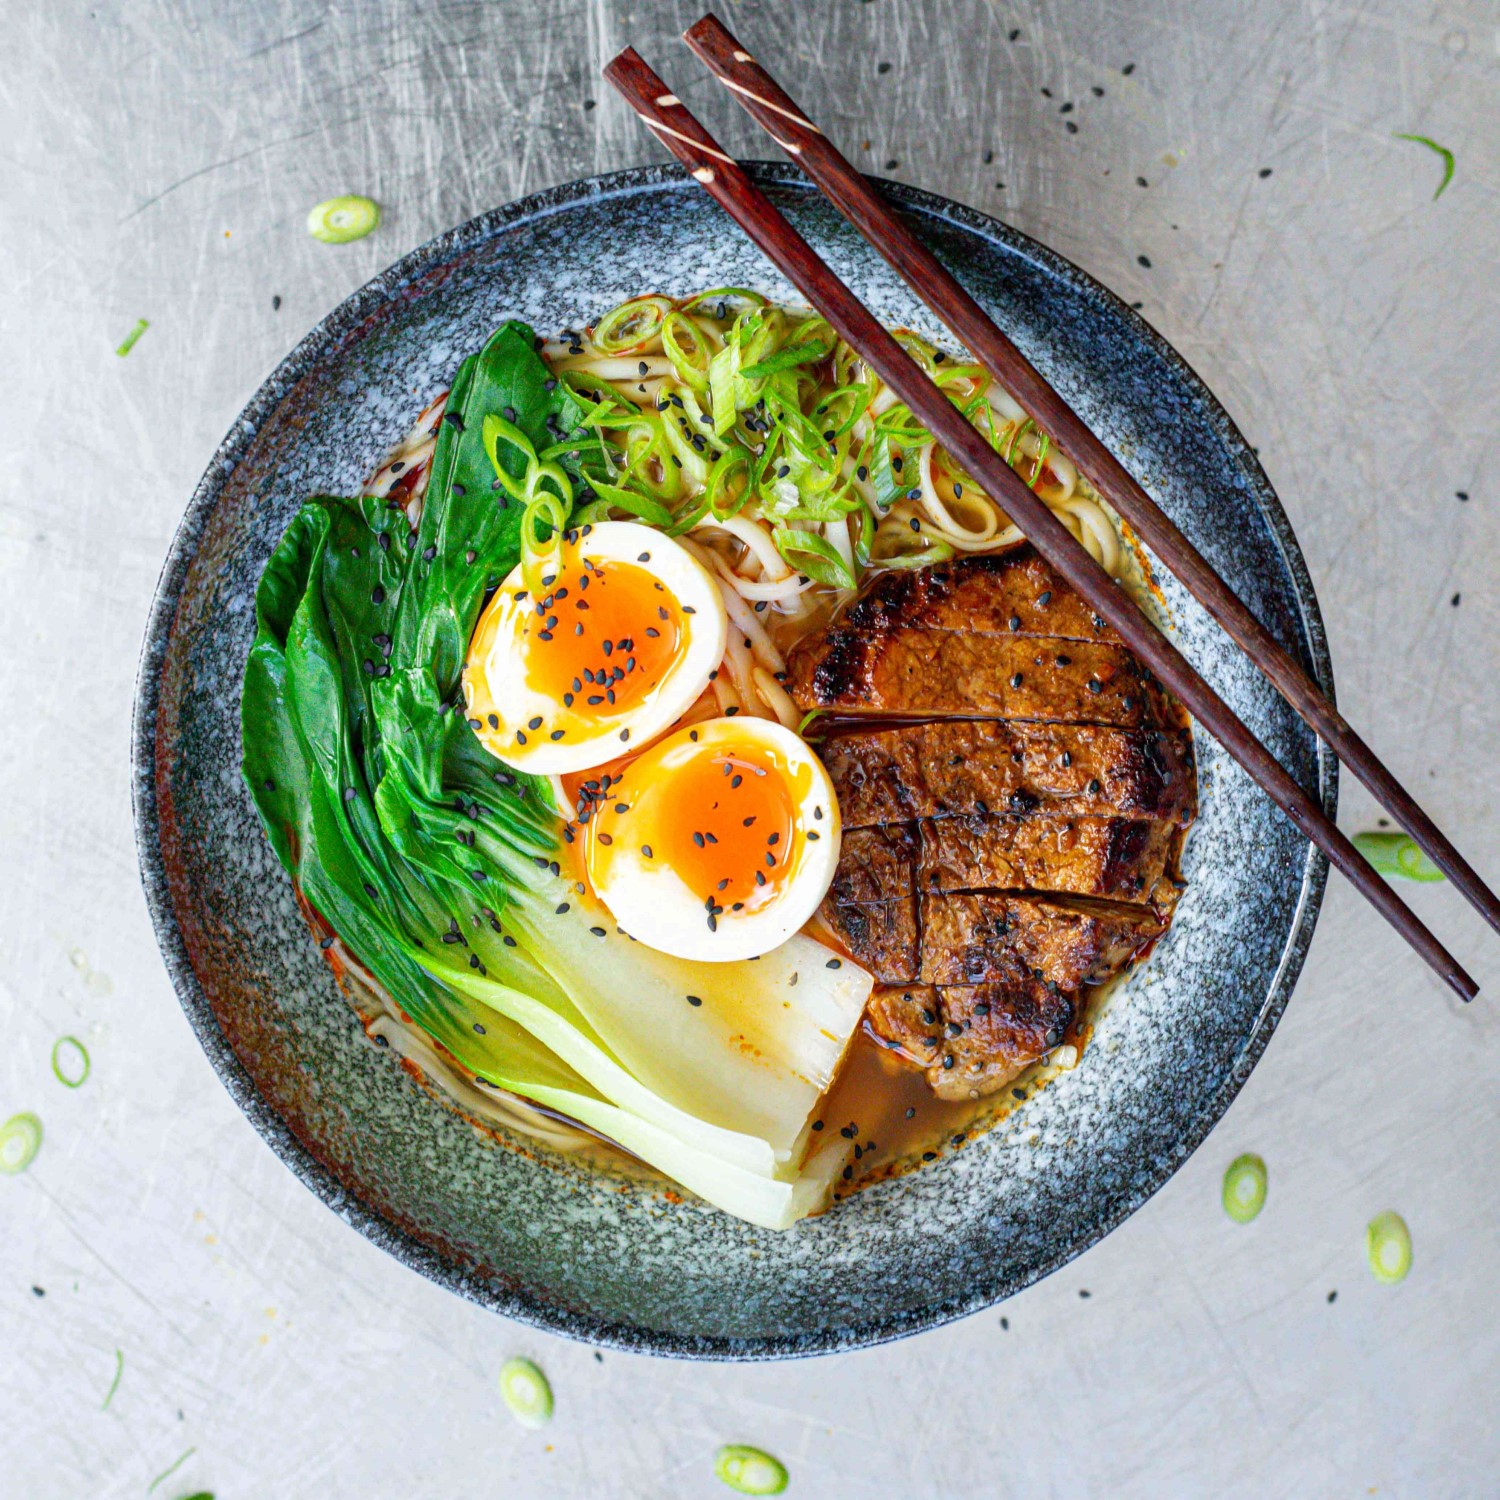 A bowl of ramen with pork, pak choi and a soft boiled egg.